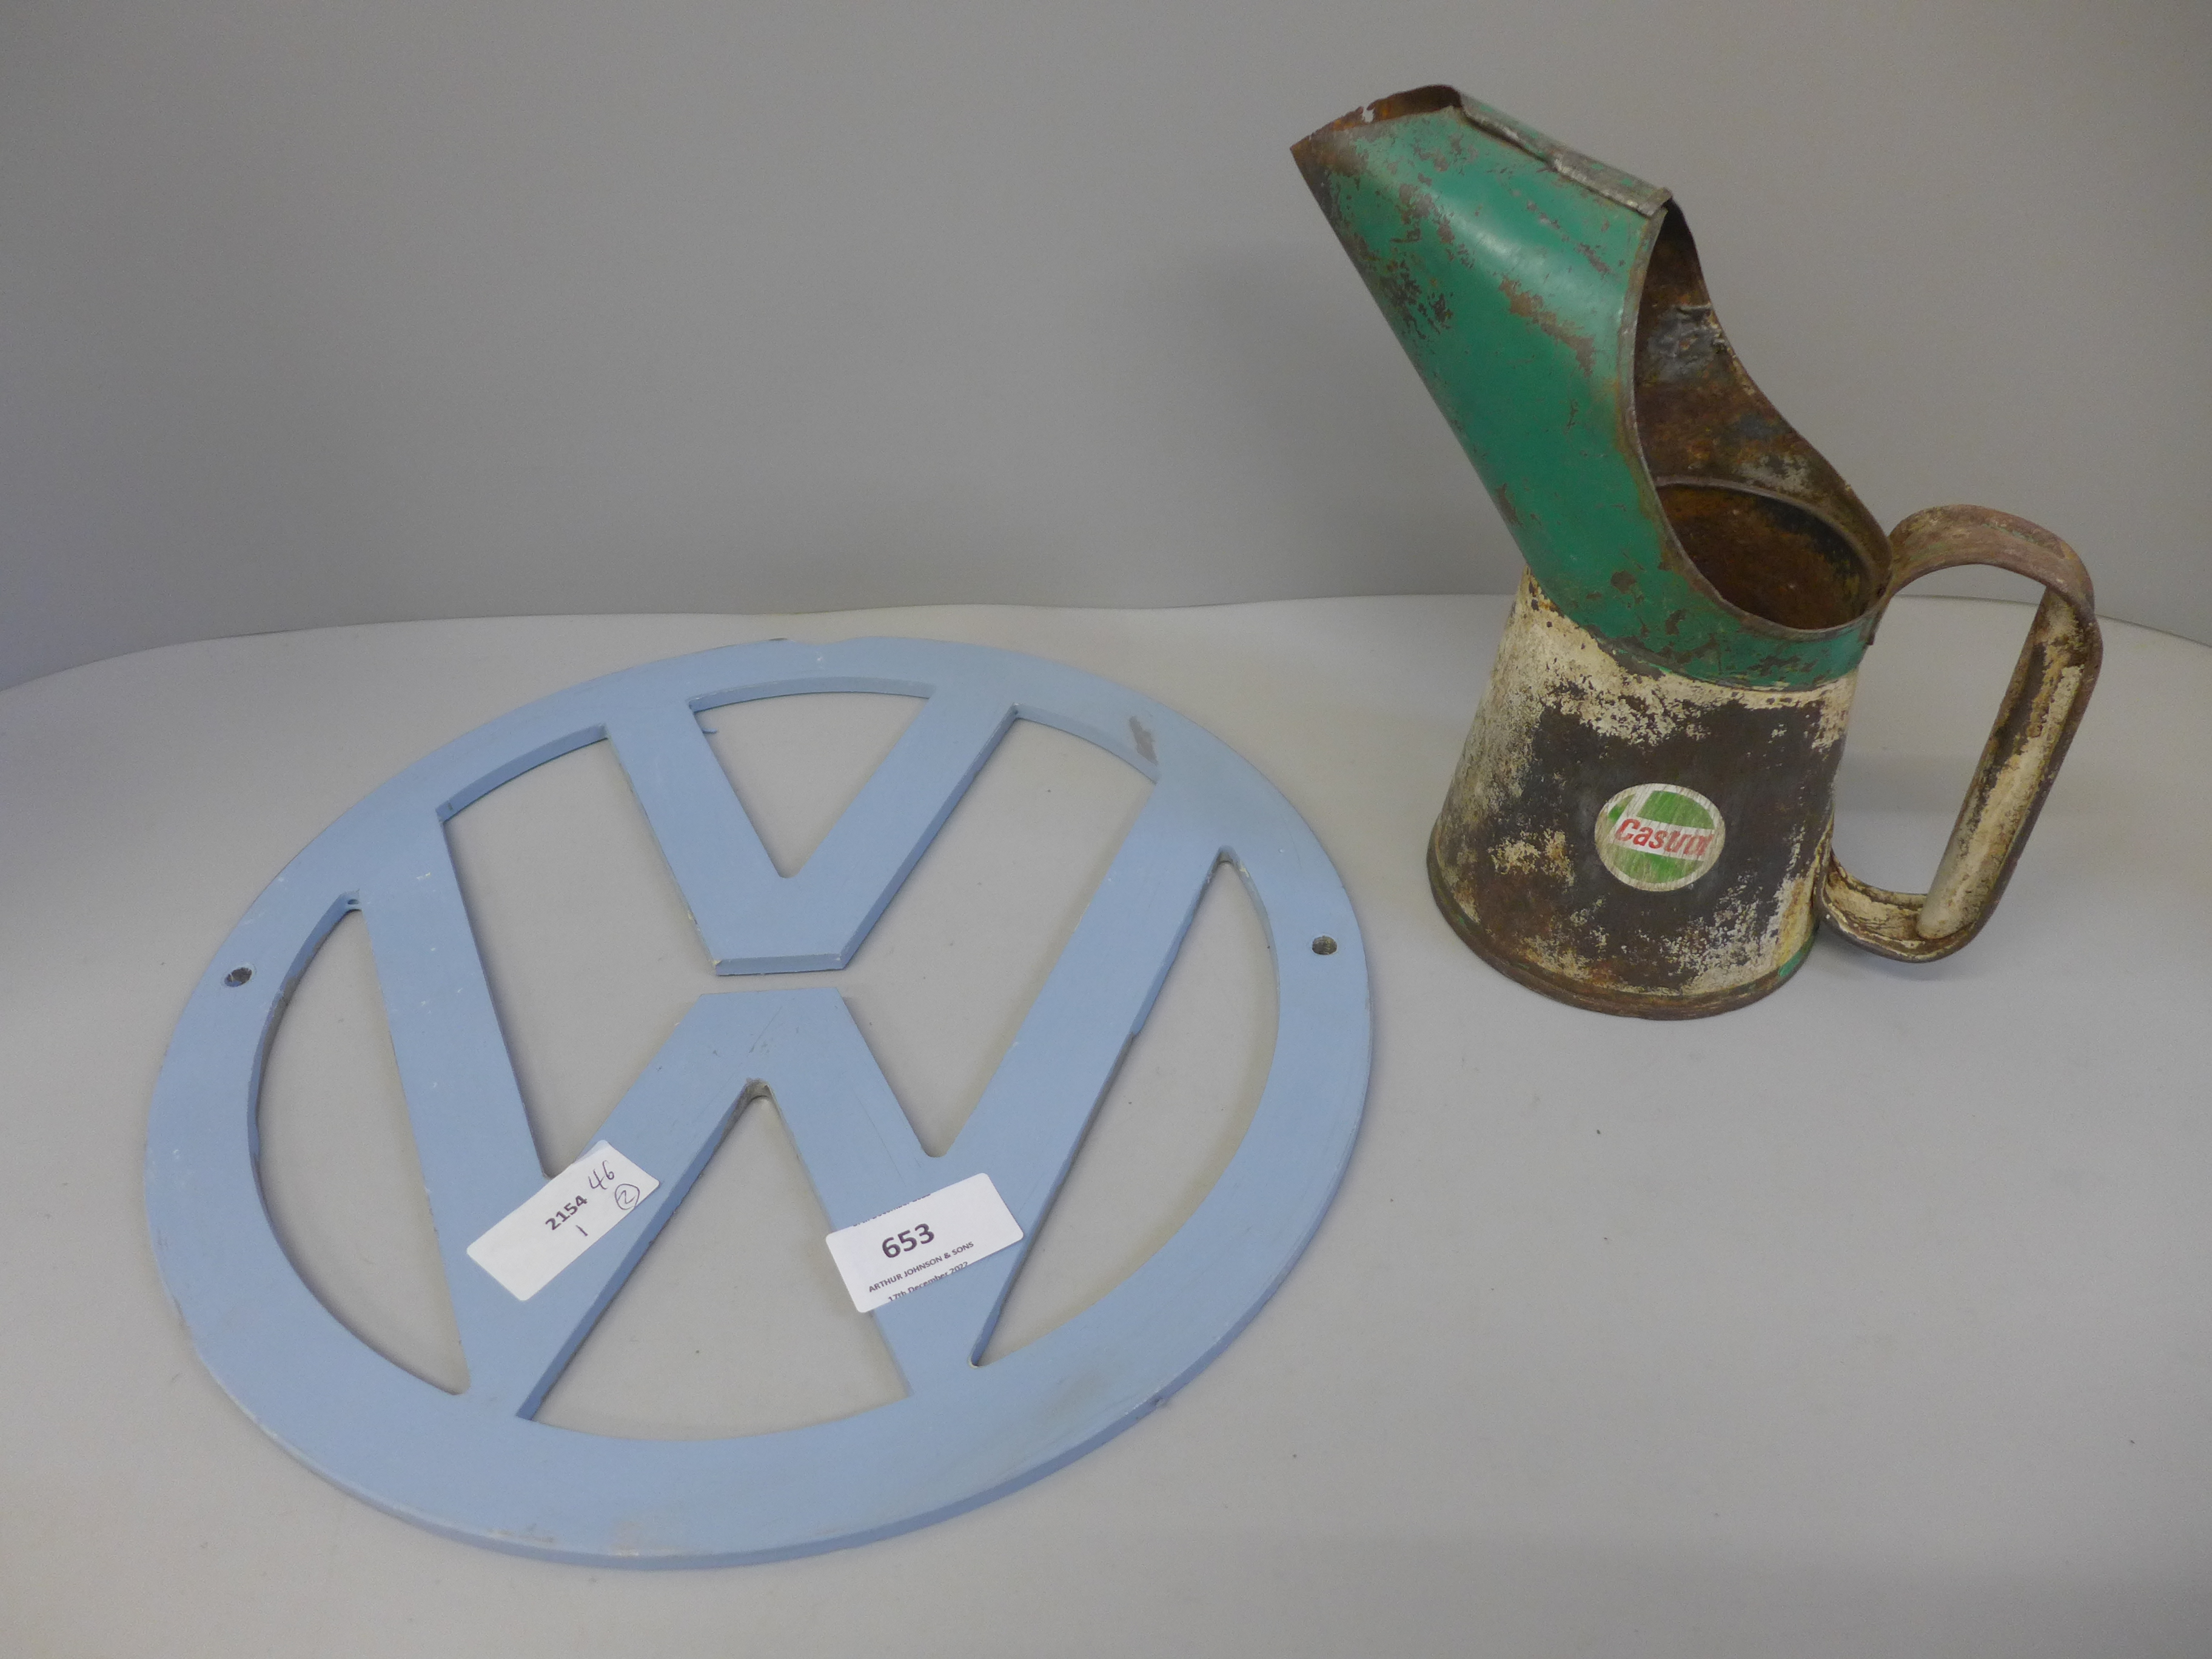 A metal VW sign and a Castrol oil can